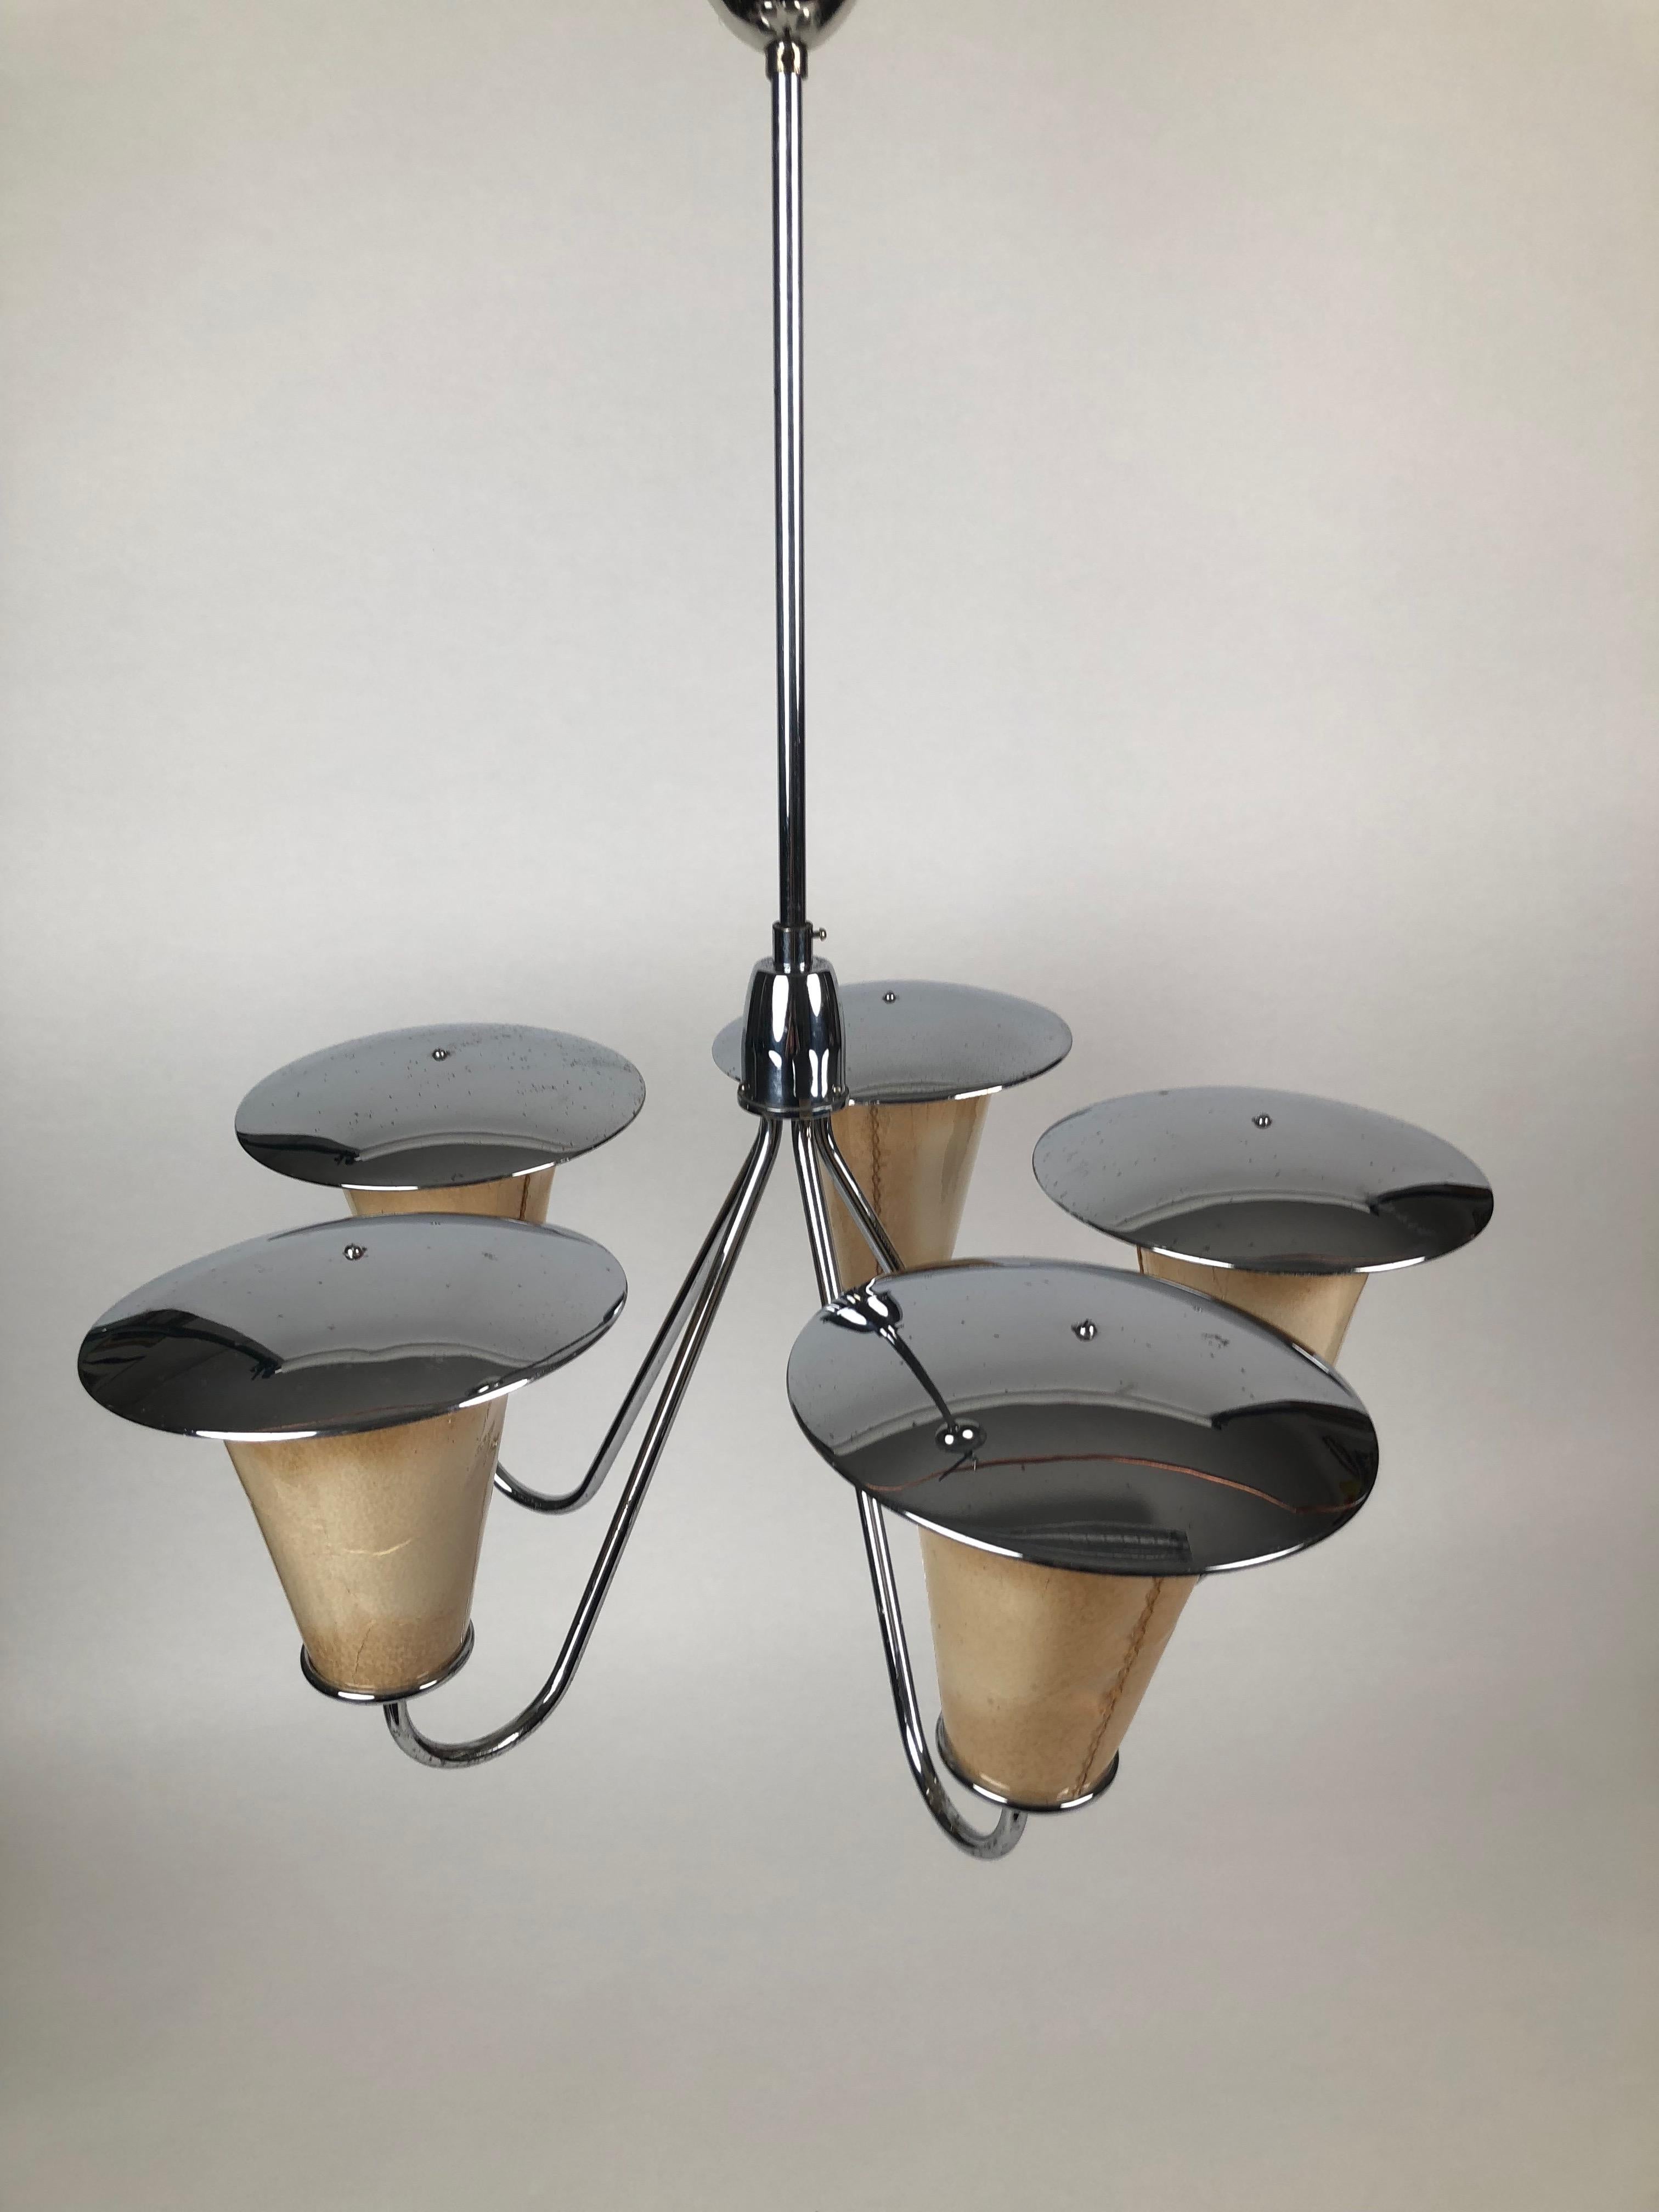 Midcentury Lantern Style Pendant Lamp In Good Condition For Sale In Vienna, Austria